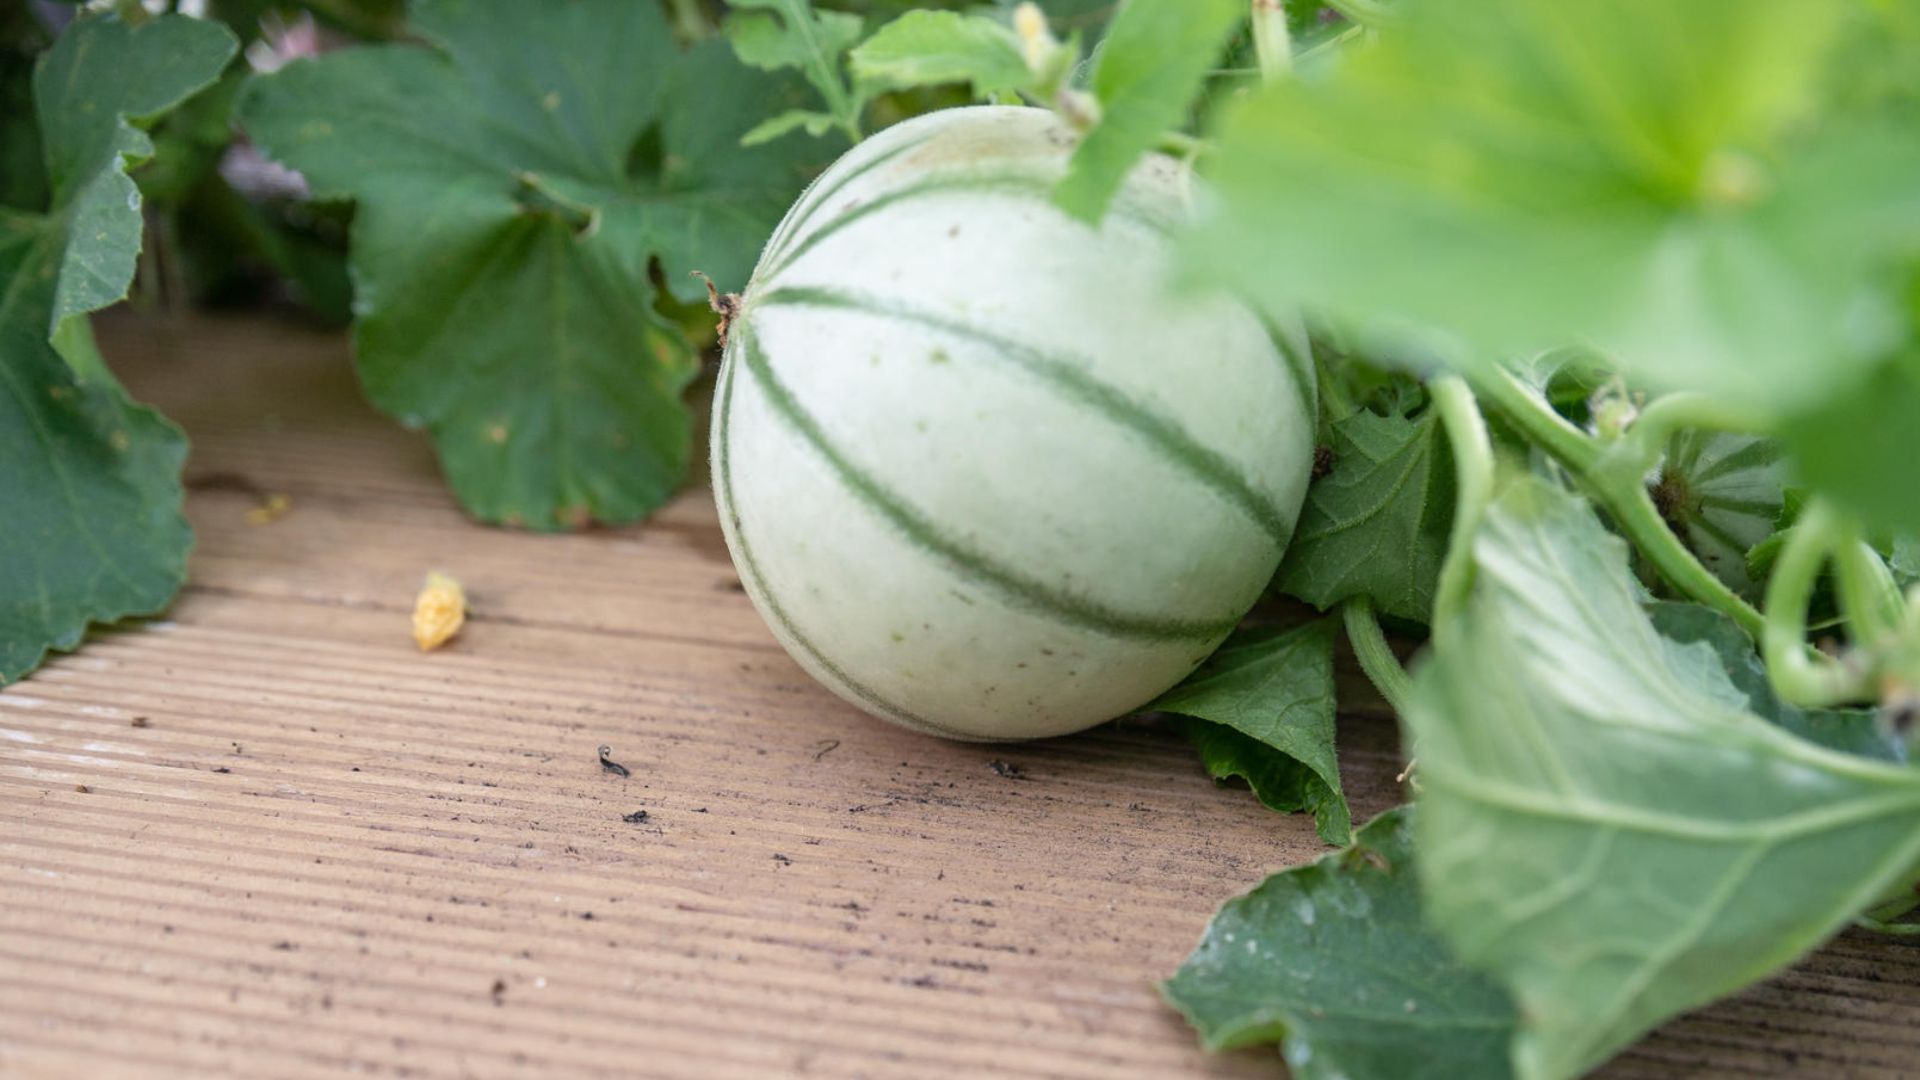 Melon growing in a Myfood greenhouse